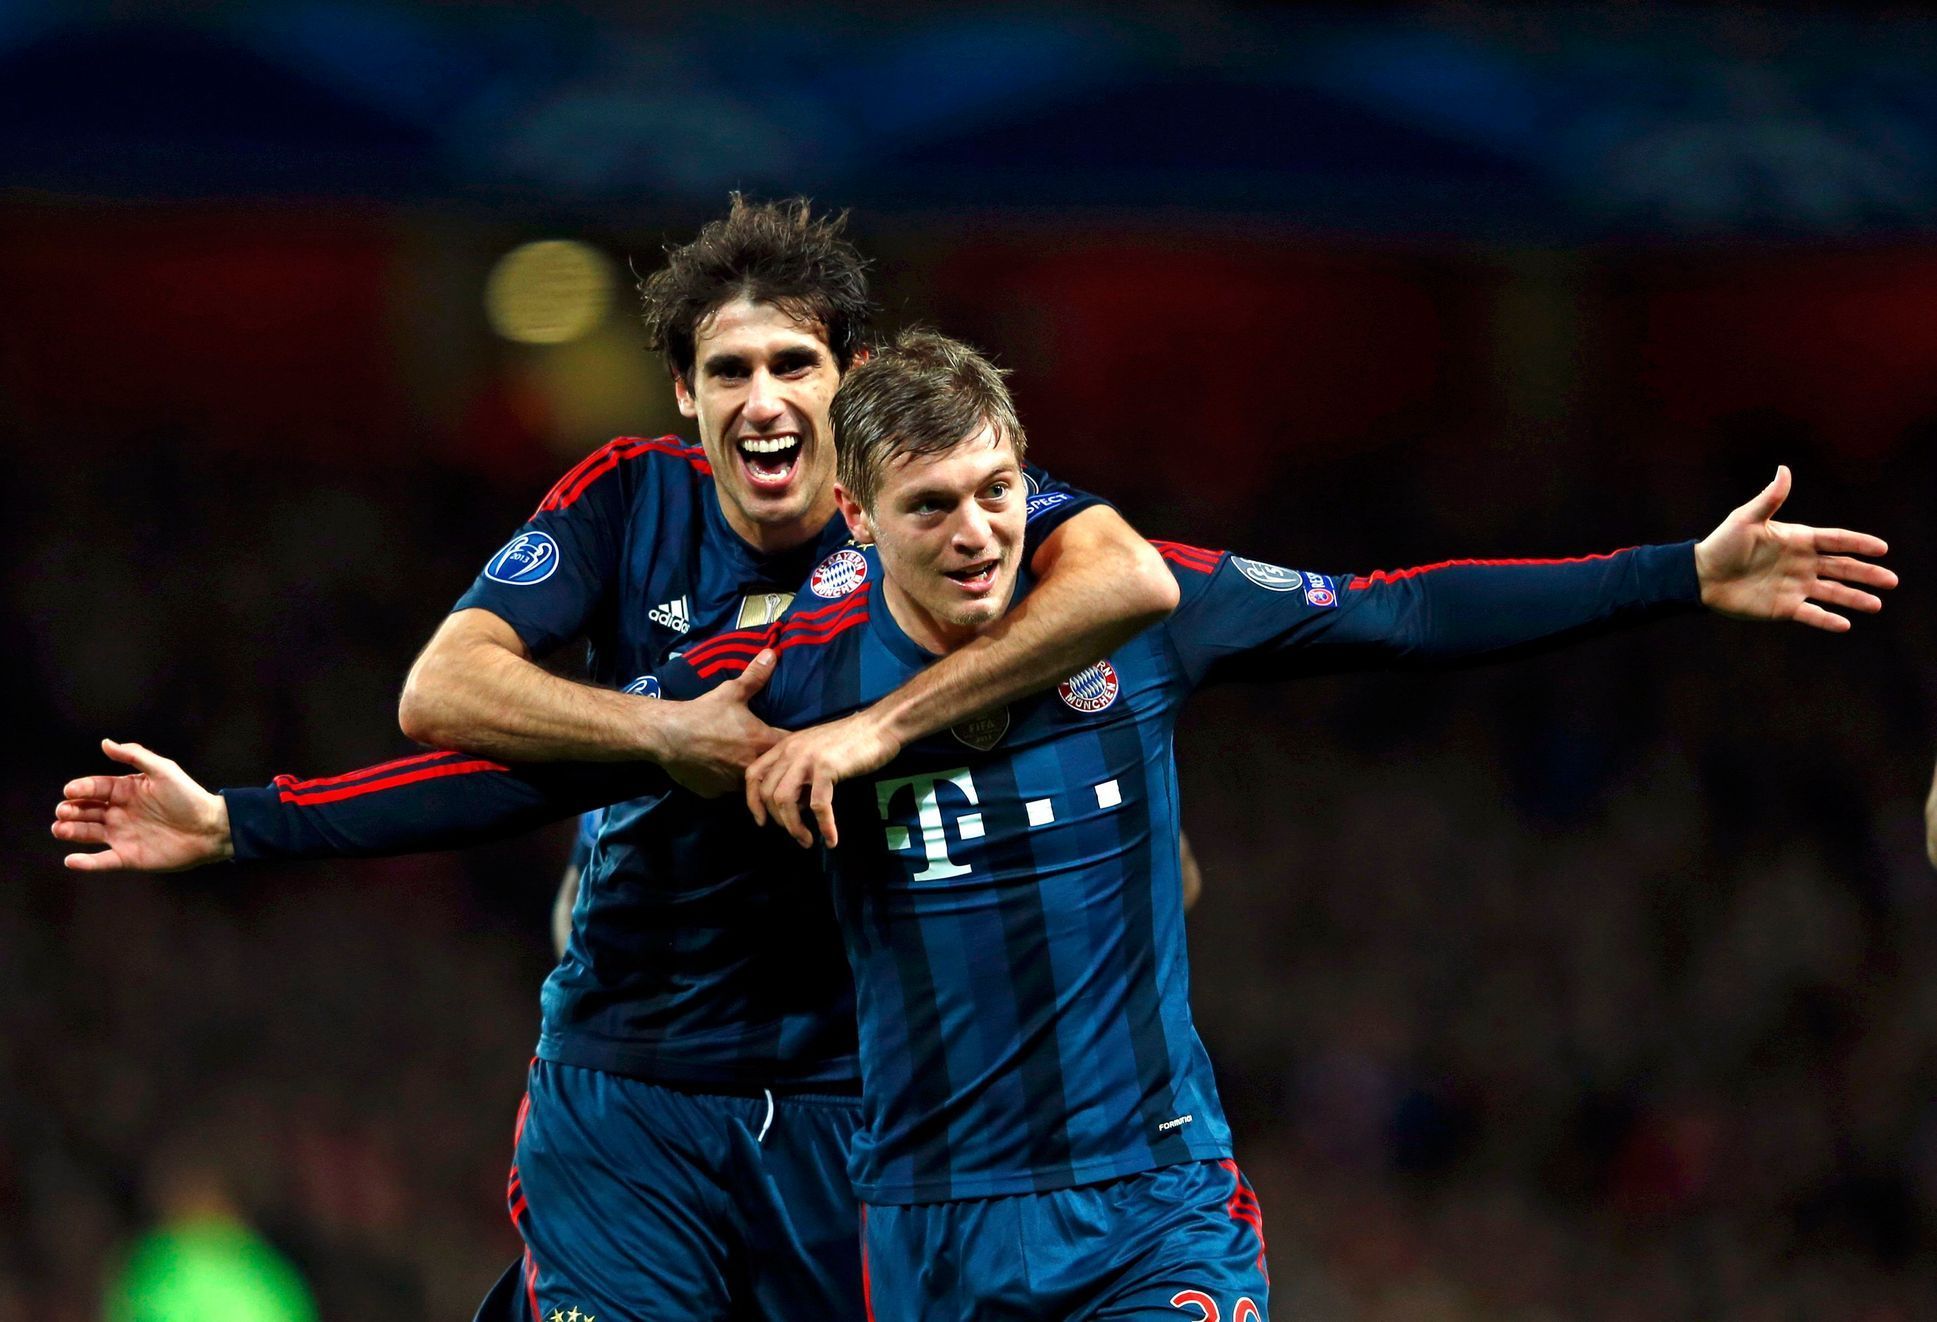 Bayern Munich's Kroos celebrates his goal against Arsenal with team mate Martinez during their Champions League round of 16 first leg soccer match at the Emirates Stadium in London